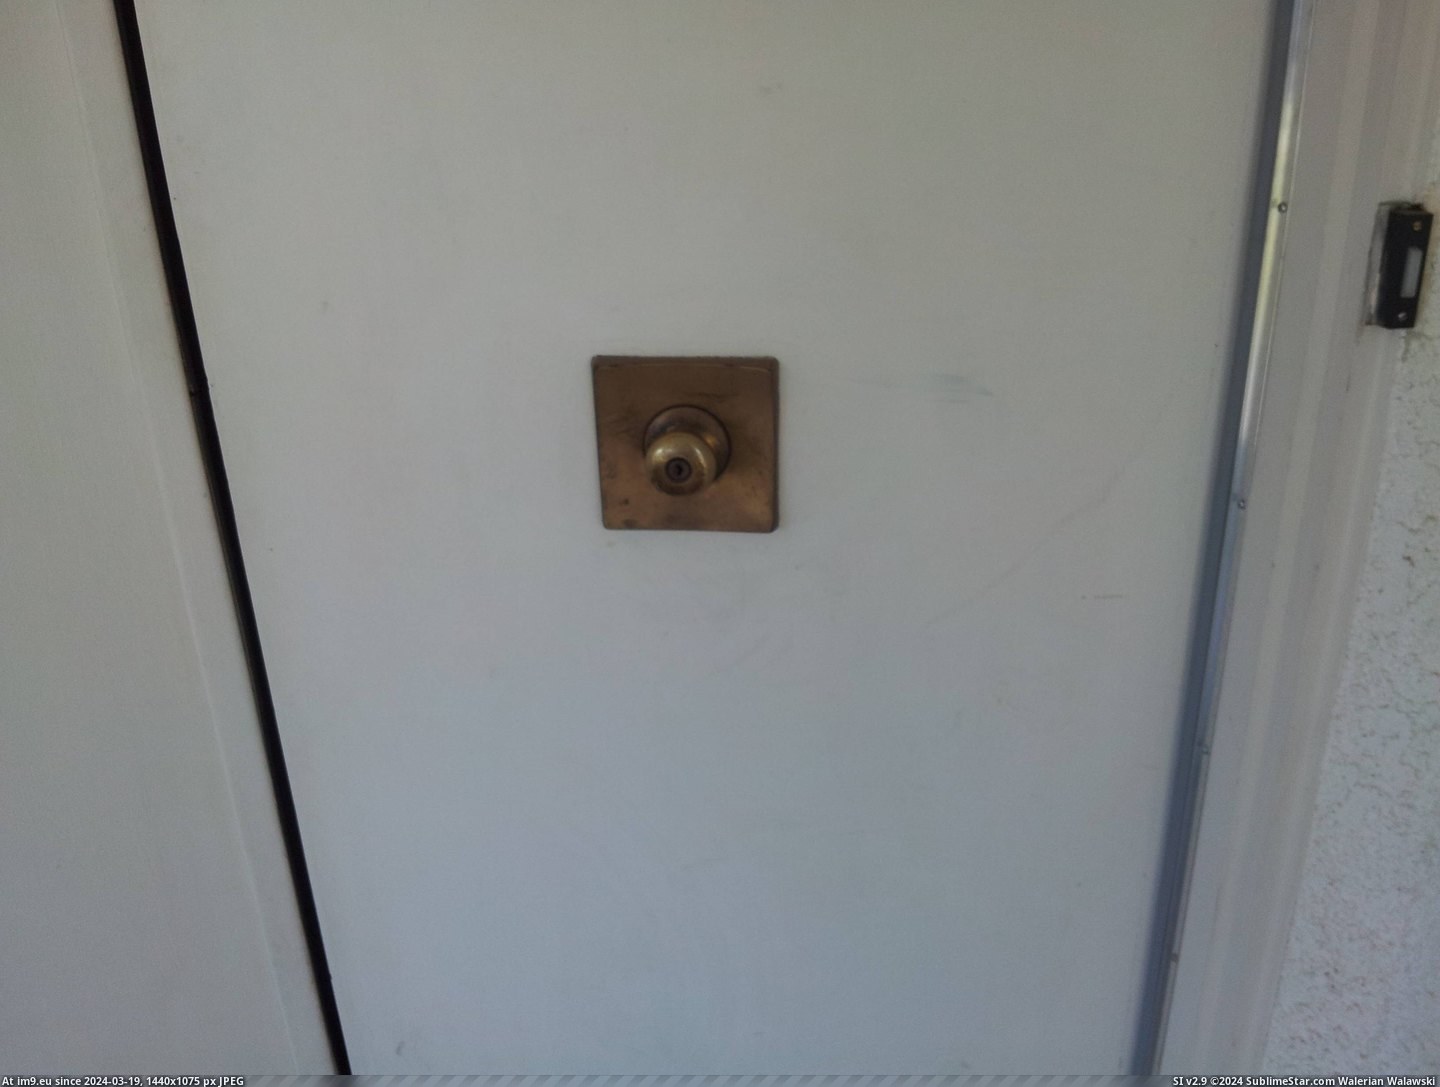 #Sister #House #Knobs #Door #Moved [Mildlyinteresting] My sister just moved into a house with door knobs in the middle of the door. 2 Pic. (Bild von album My r/MILDLYINTERESTING favs))